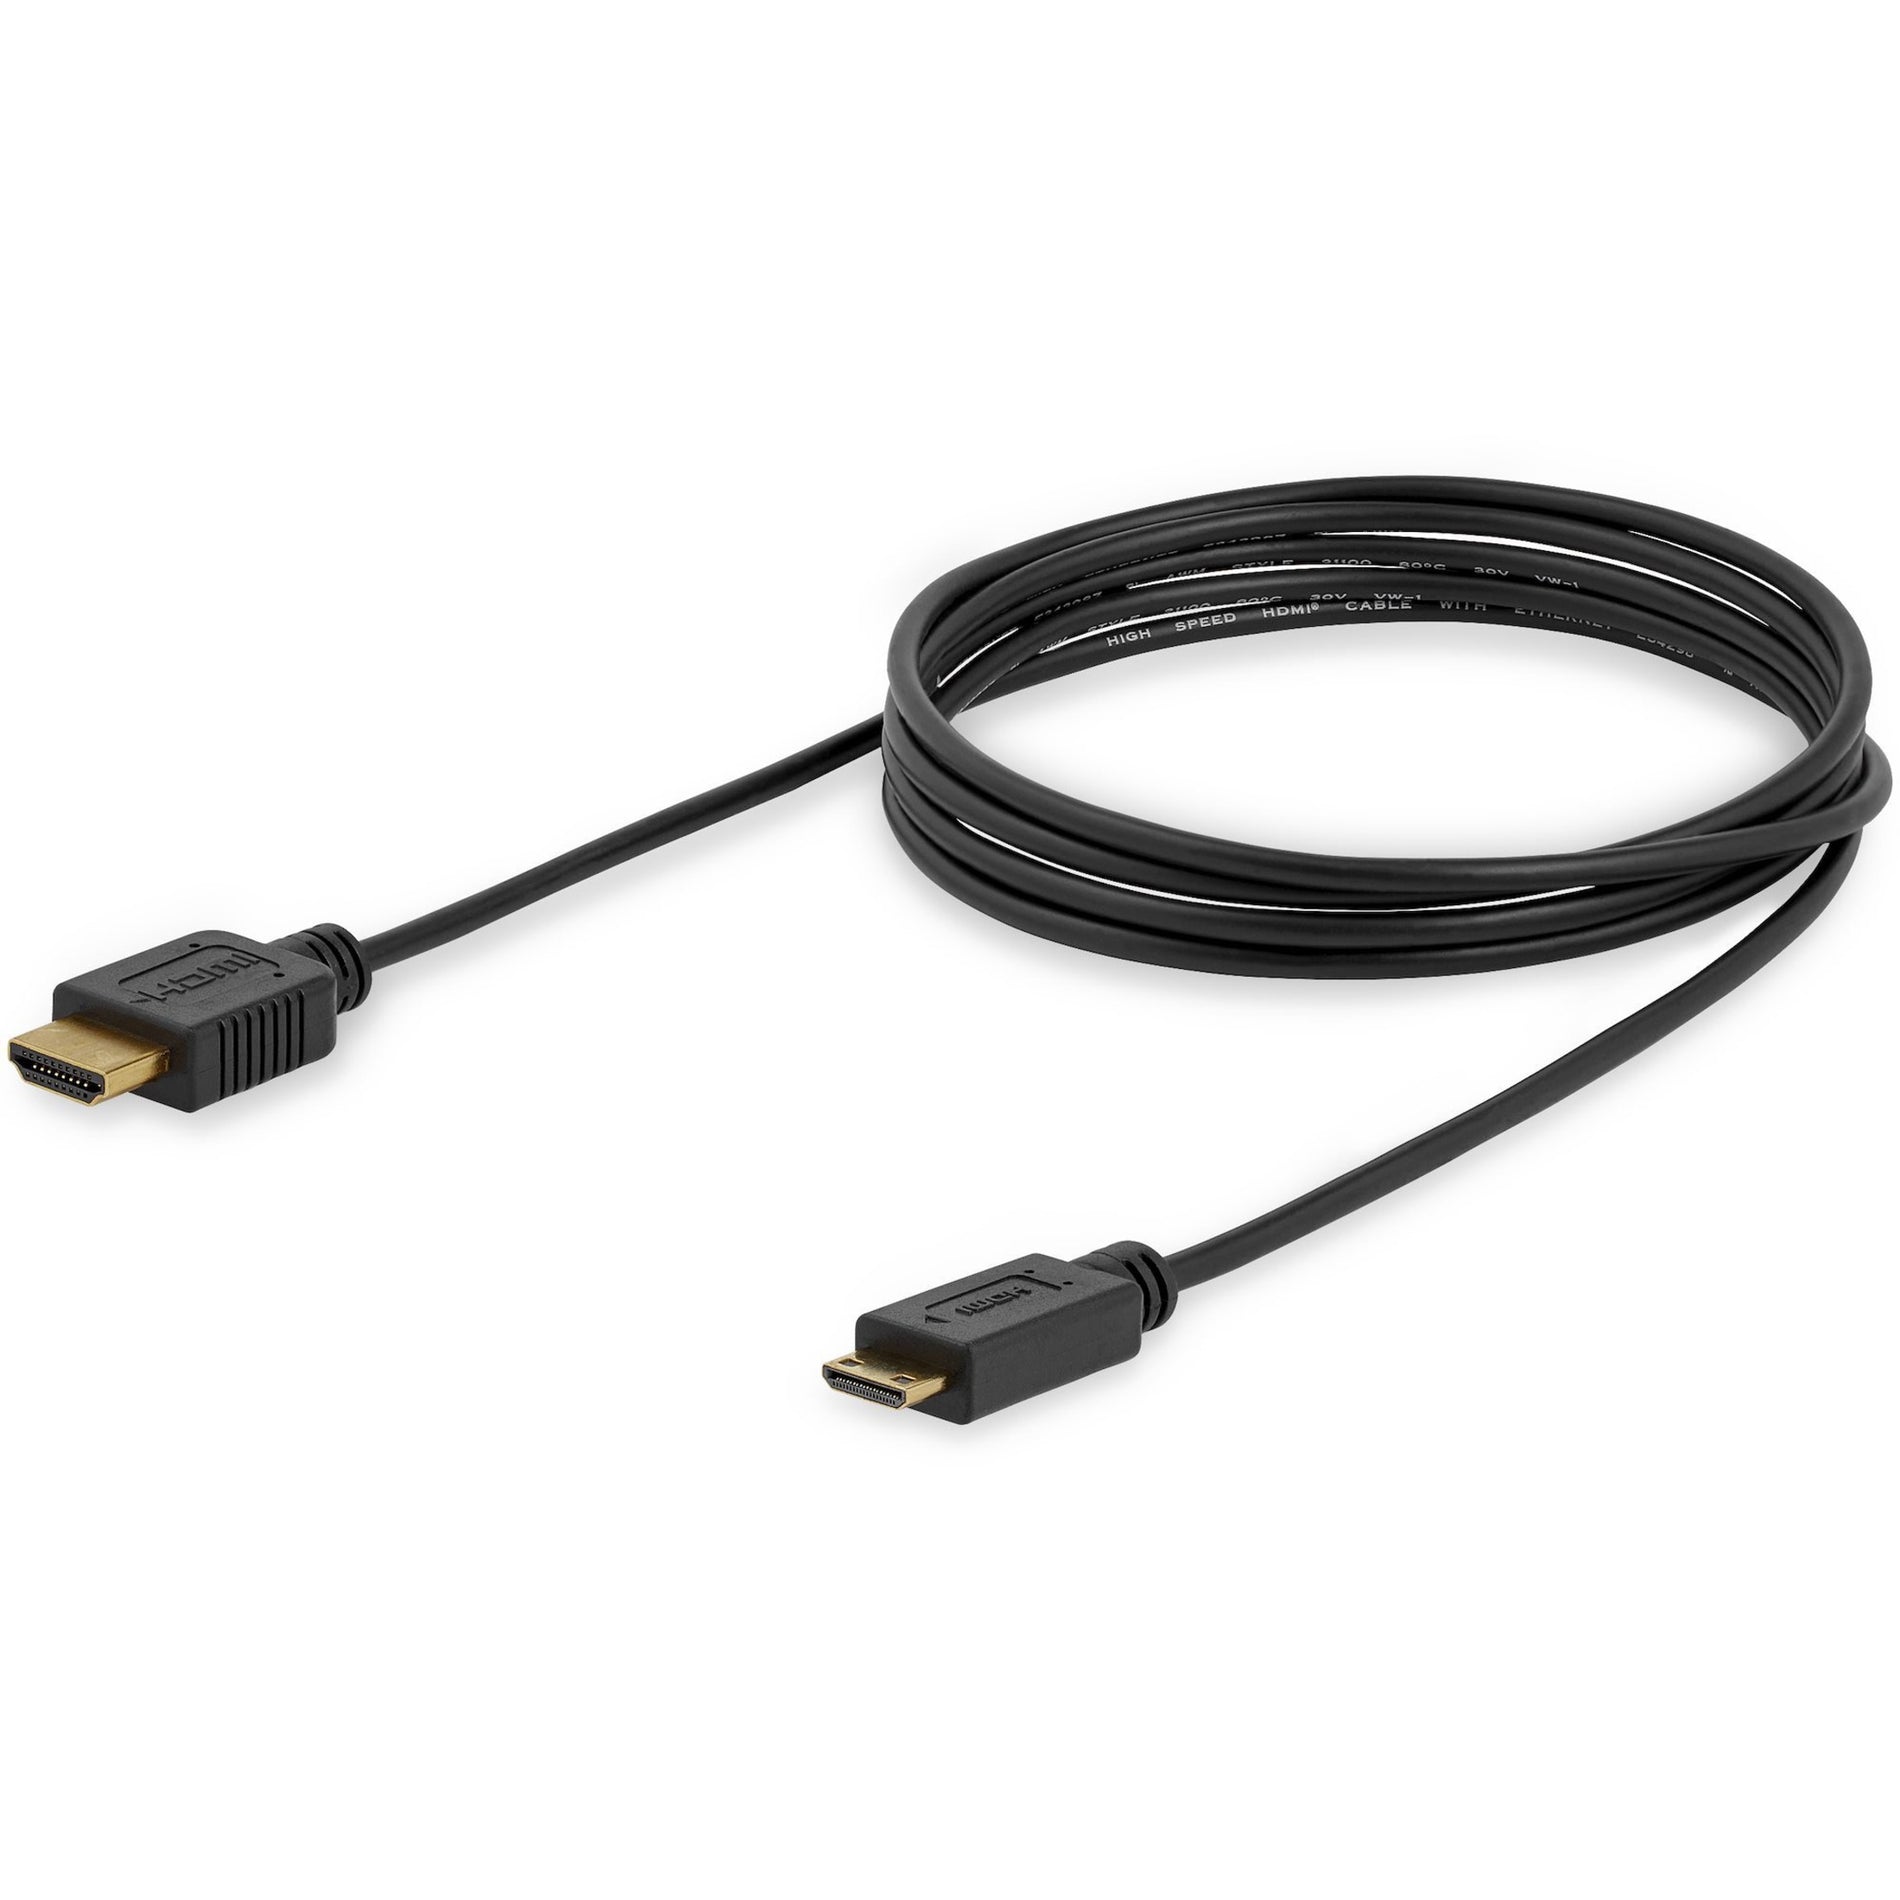 StarTech.com HDMIACMM6S 6 ft Slim High Speed HDMI Cable with Ethernet - HDMI to HDMI Mini M/M, 10.2 Gbit/s, 3840 x 2160, Gold Plated